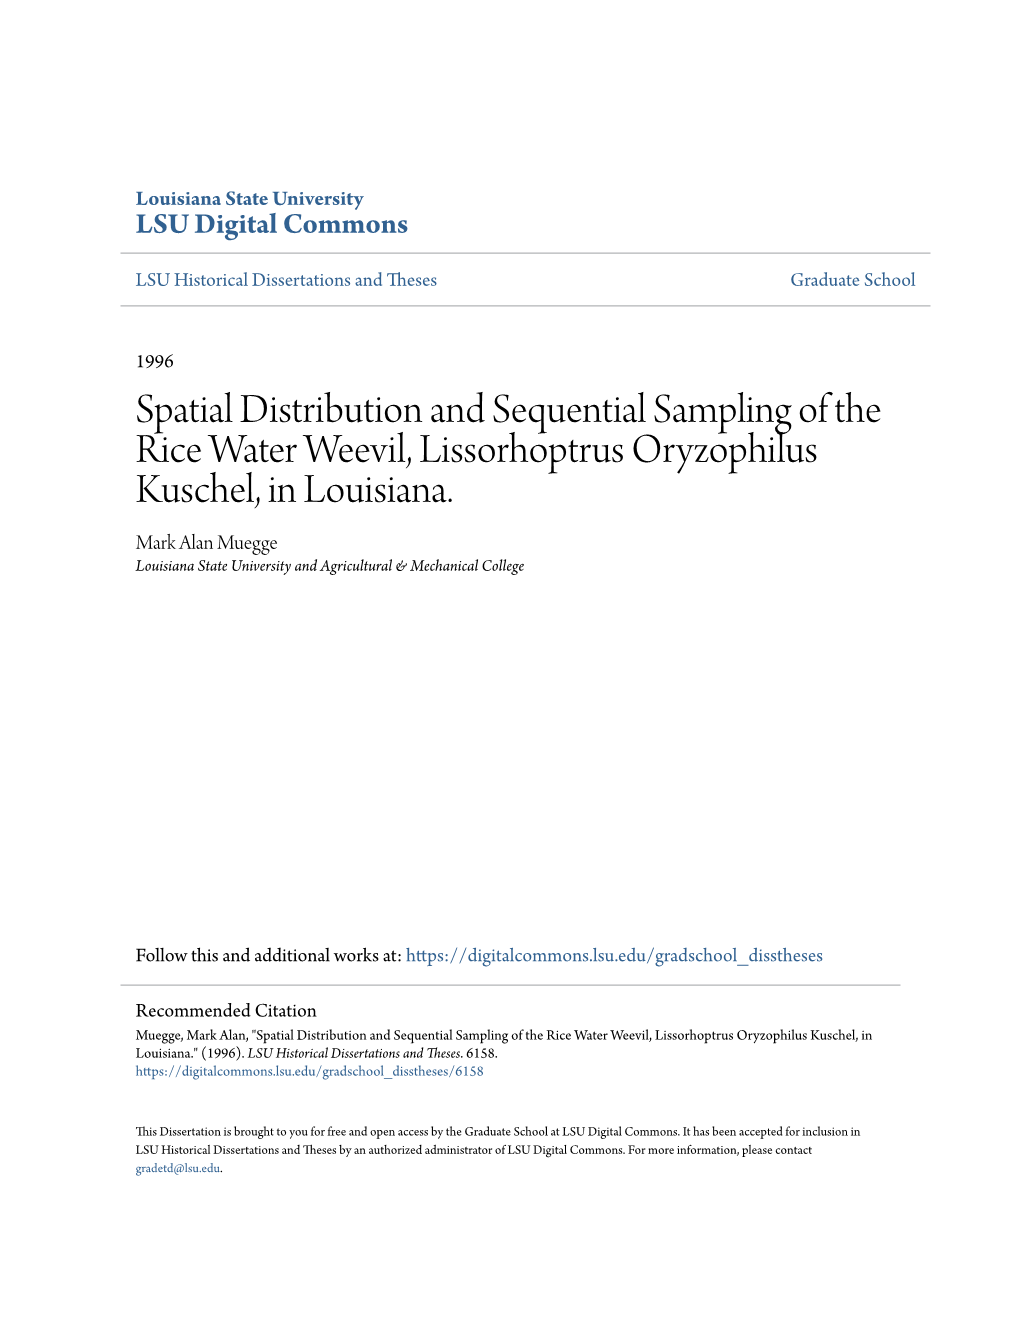 Spatial Distribution and Sequential Sampling of the Rice Water Weevil, Lissorhoptrus Oryzophilus Kuschel, in Louisiana